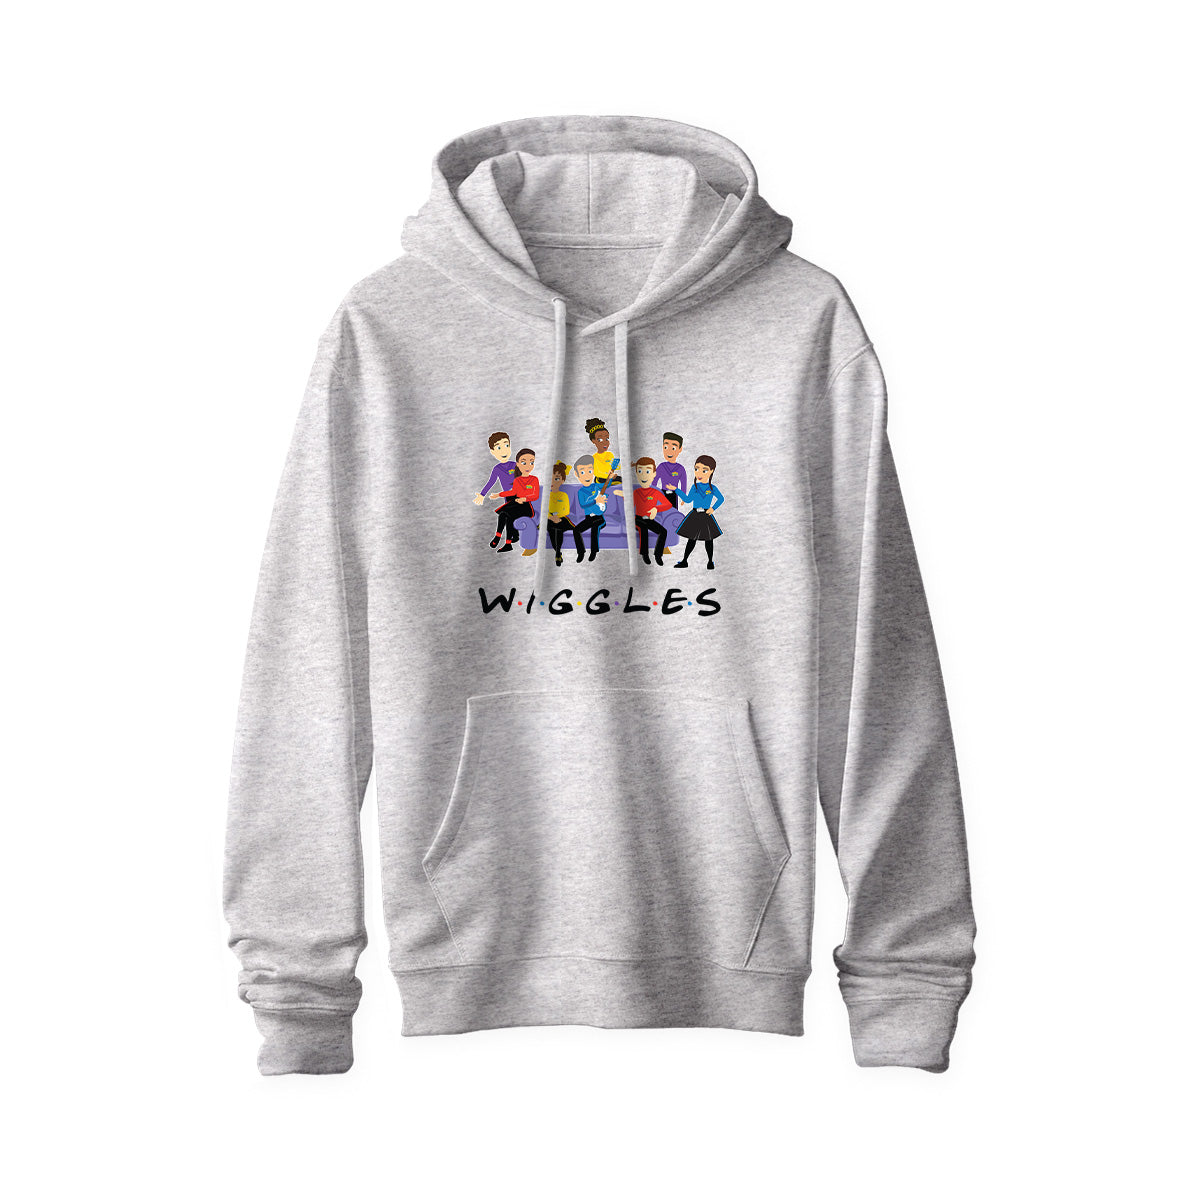 The Wiggles Adult Group Hoodie V1